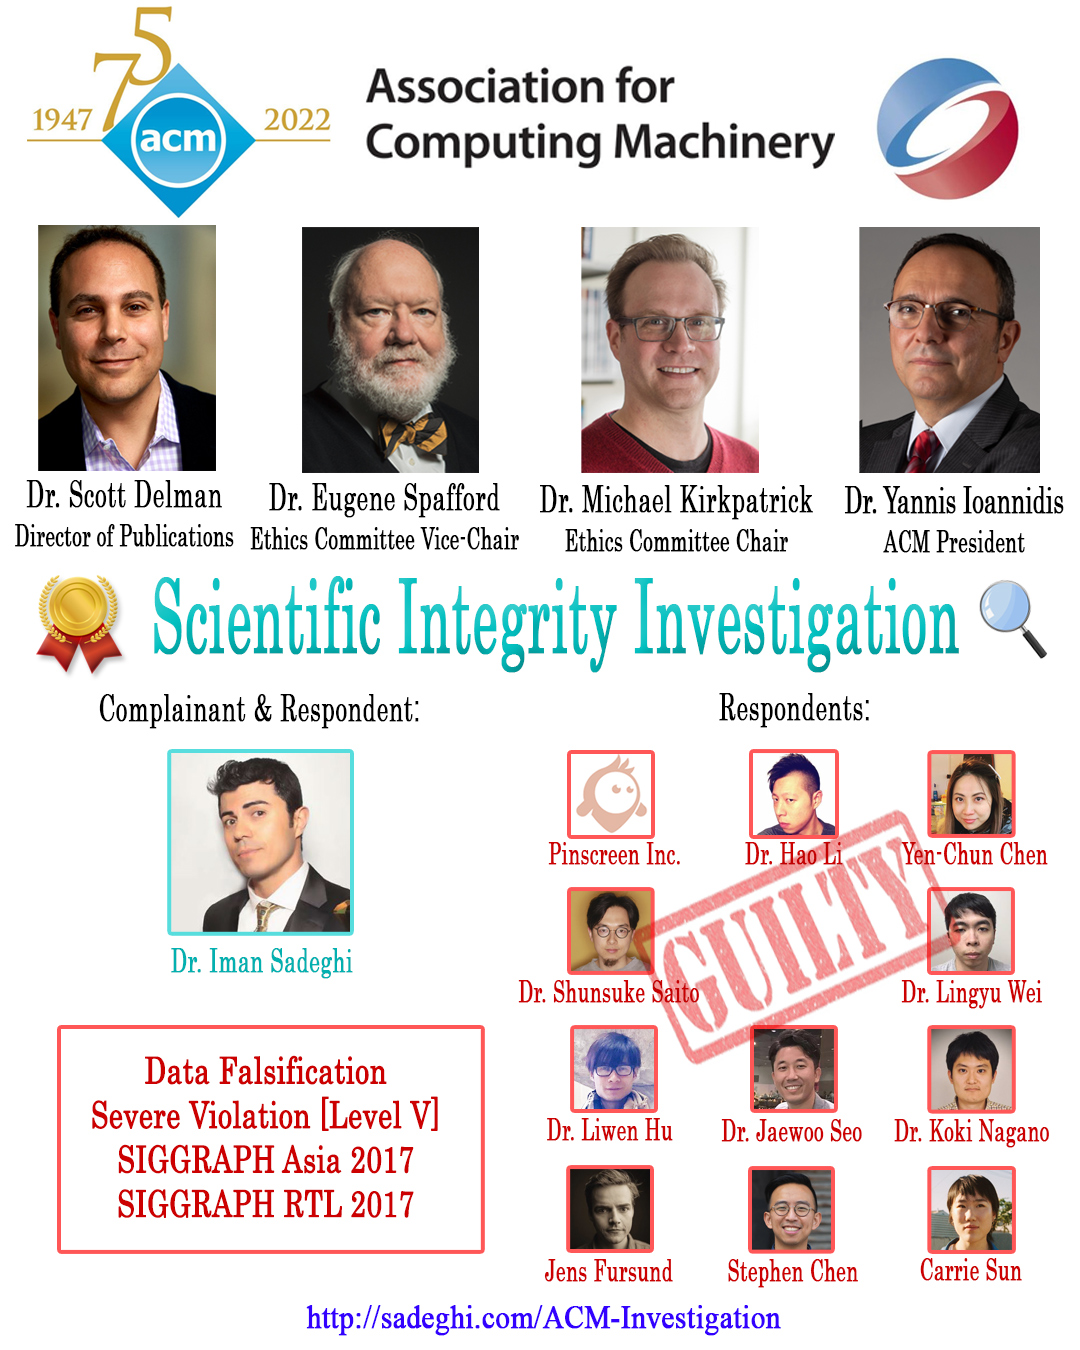 ACM's Investigation re Hao Li's and Pinscreen's Scientific Misconduct at SIGGRAPH and SIGGRAPH Asia 2017